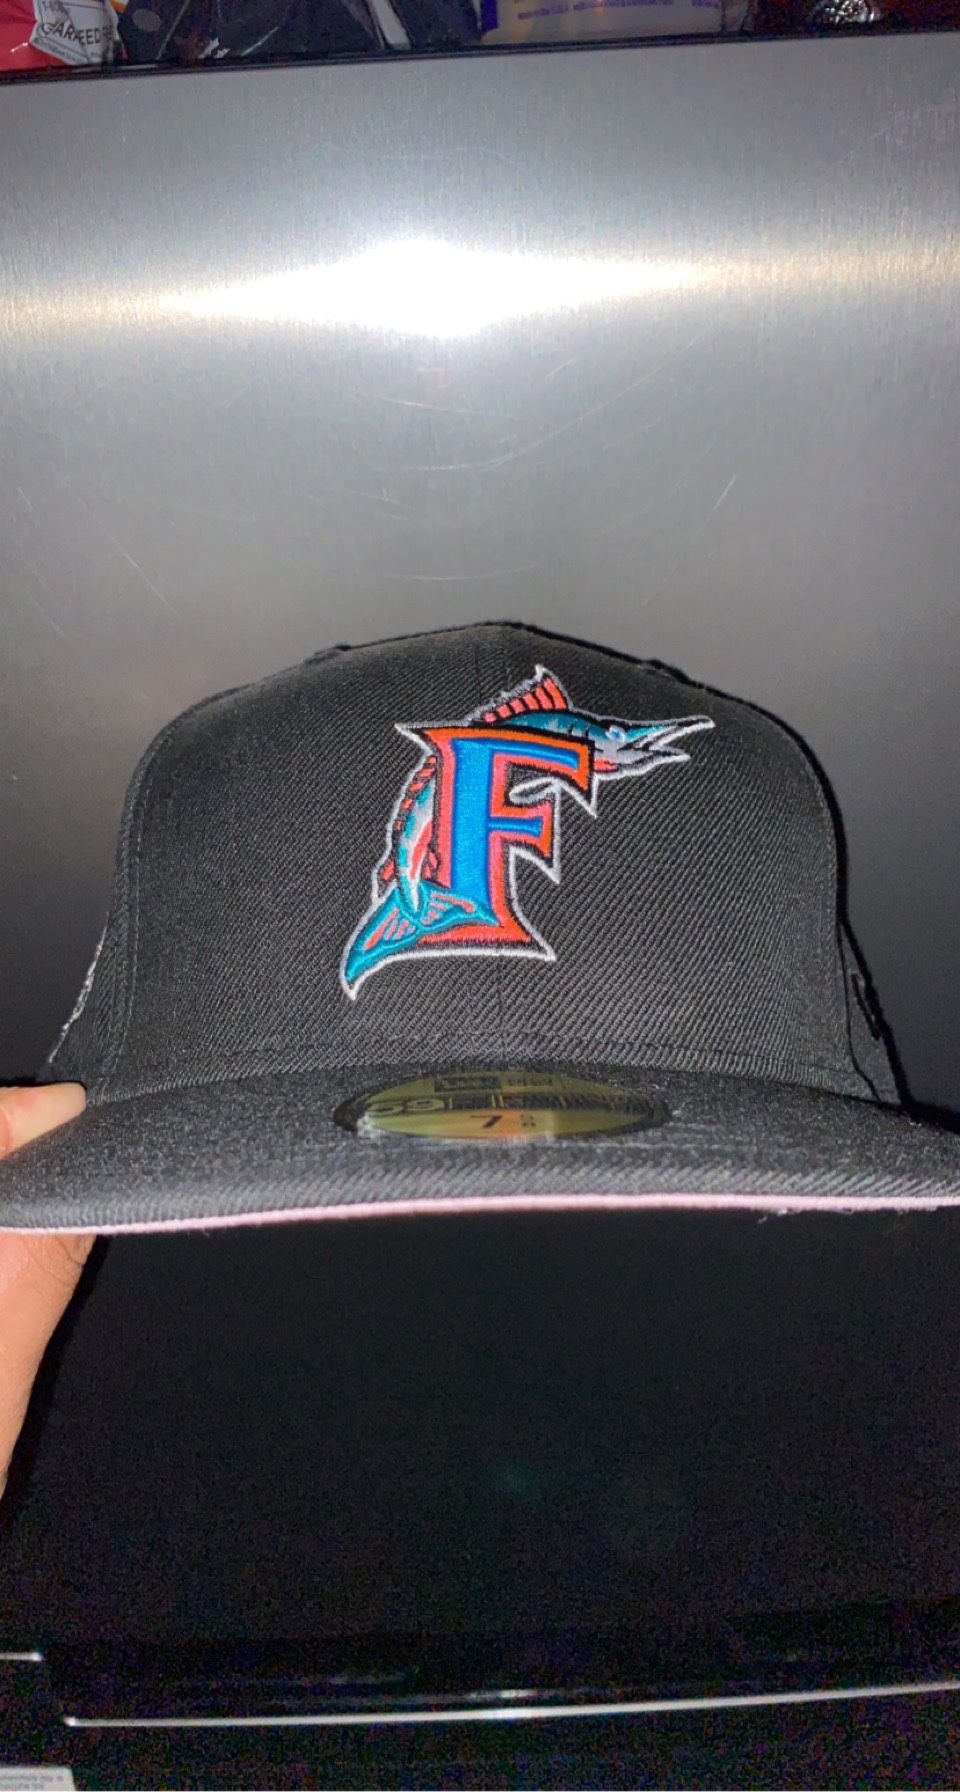 Florida Marlins MIAMI VICE SIDE-PATCH Black-Beetroot Fitted Hat